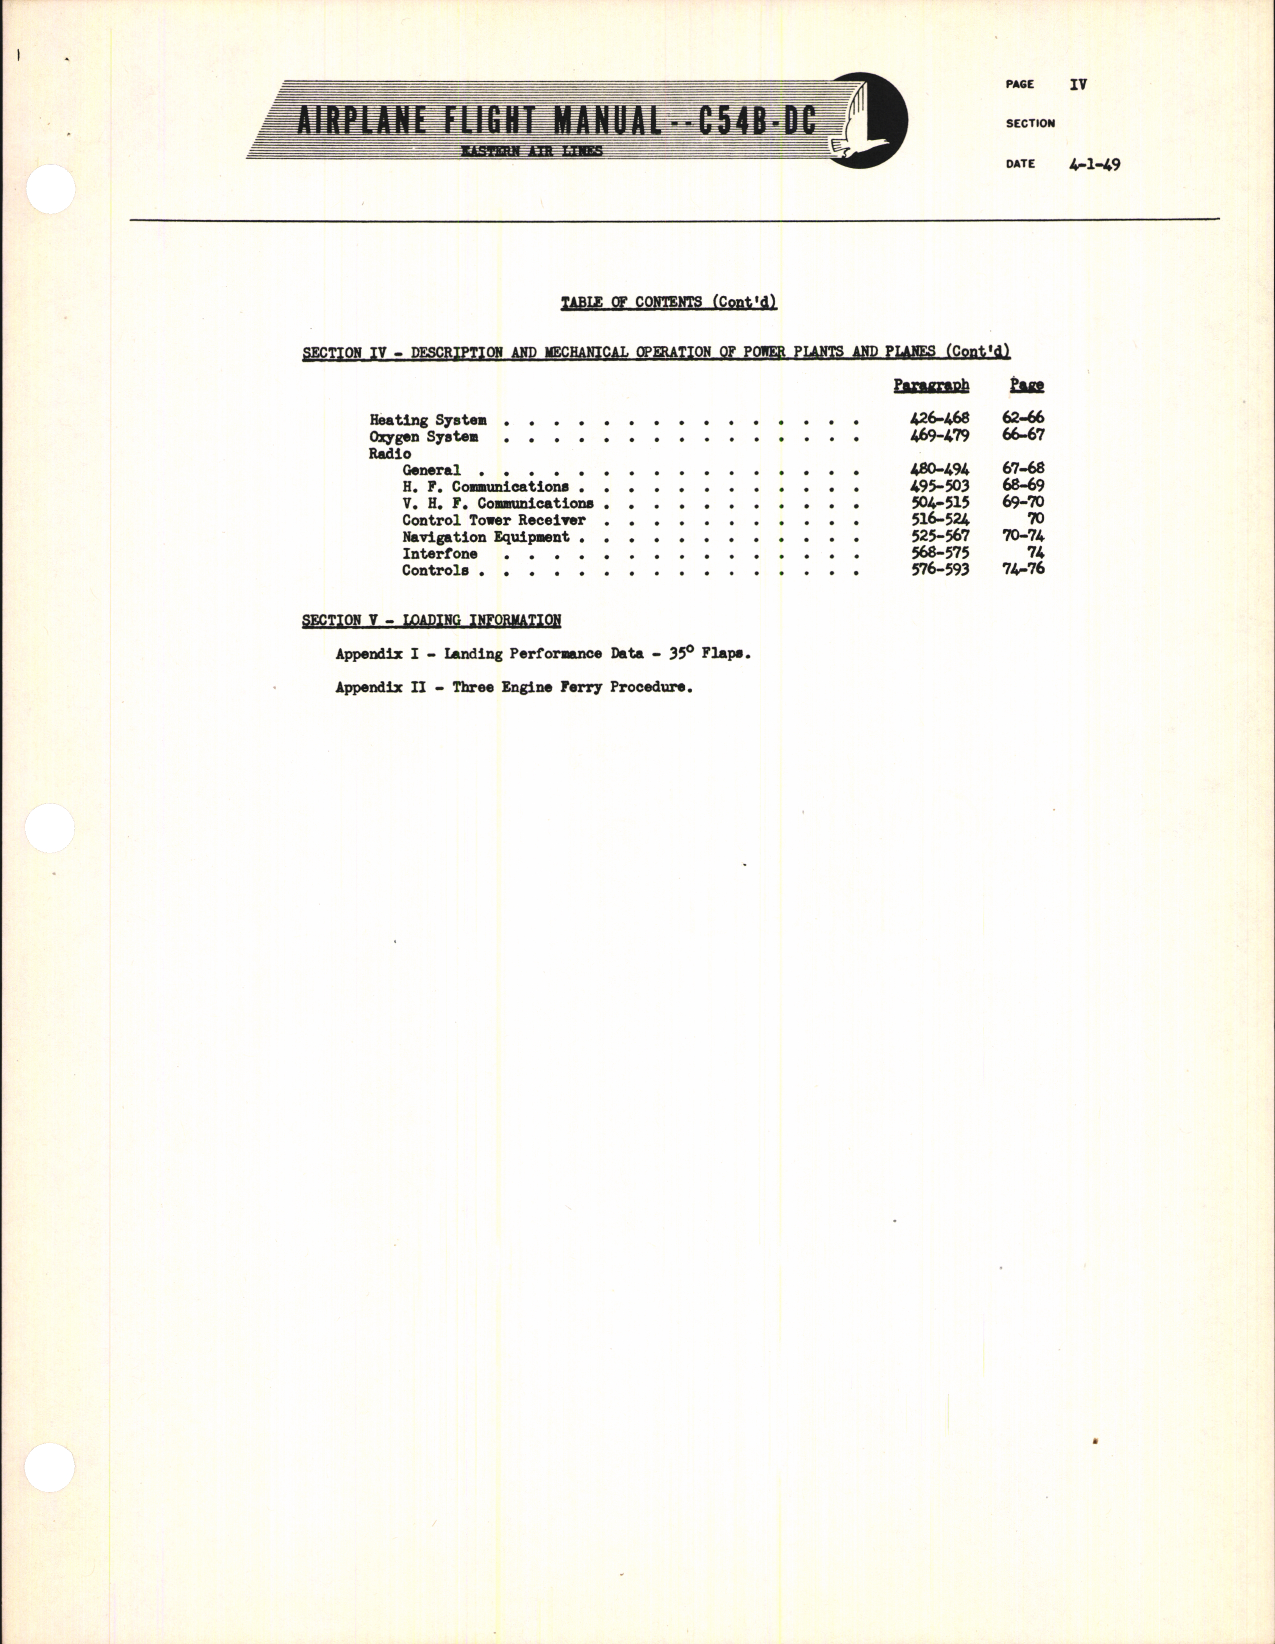 Sample page 7 from AirCorps Library document: Airplane Flight Manual for C-54B-DC